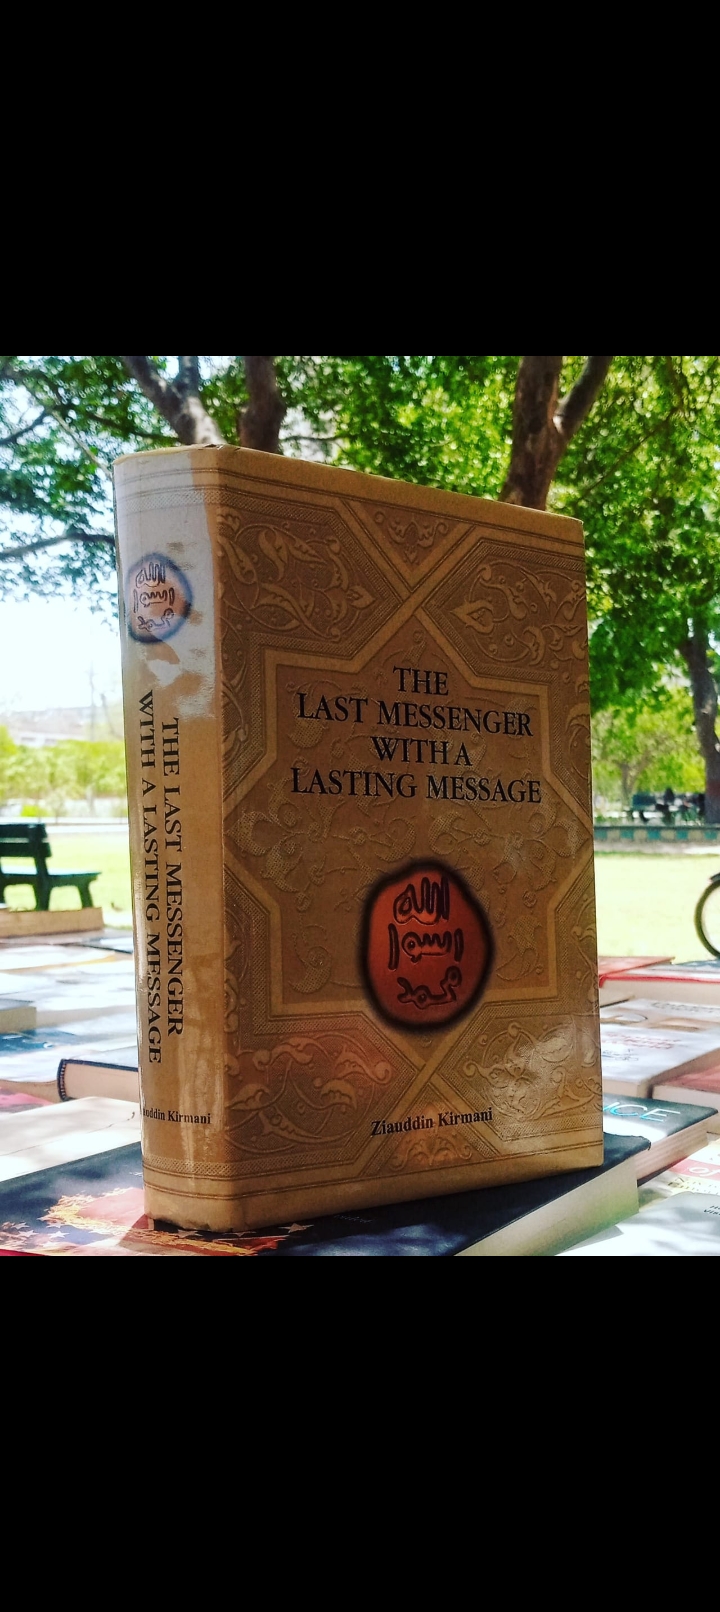 the last messenger with a lasting message by ziauddin kirmani. original hardcover like new